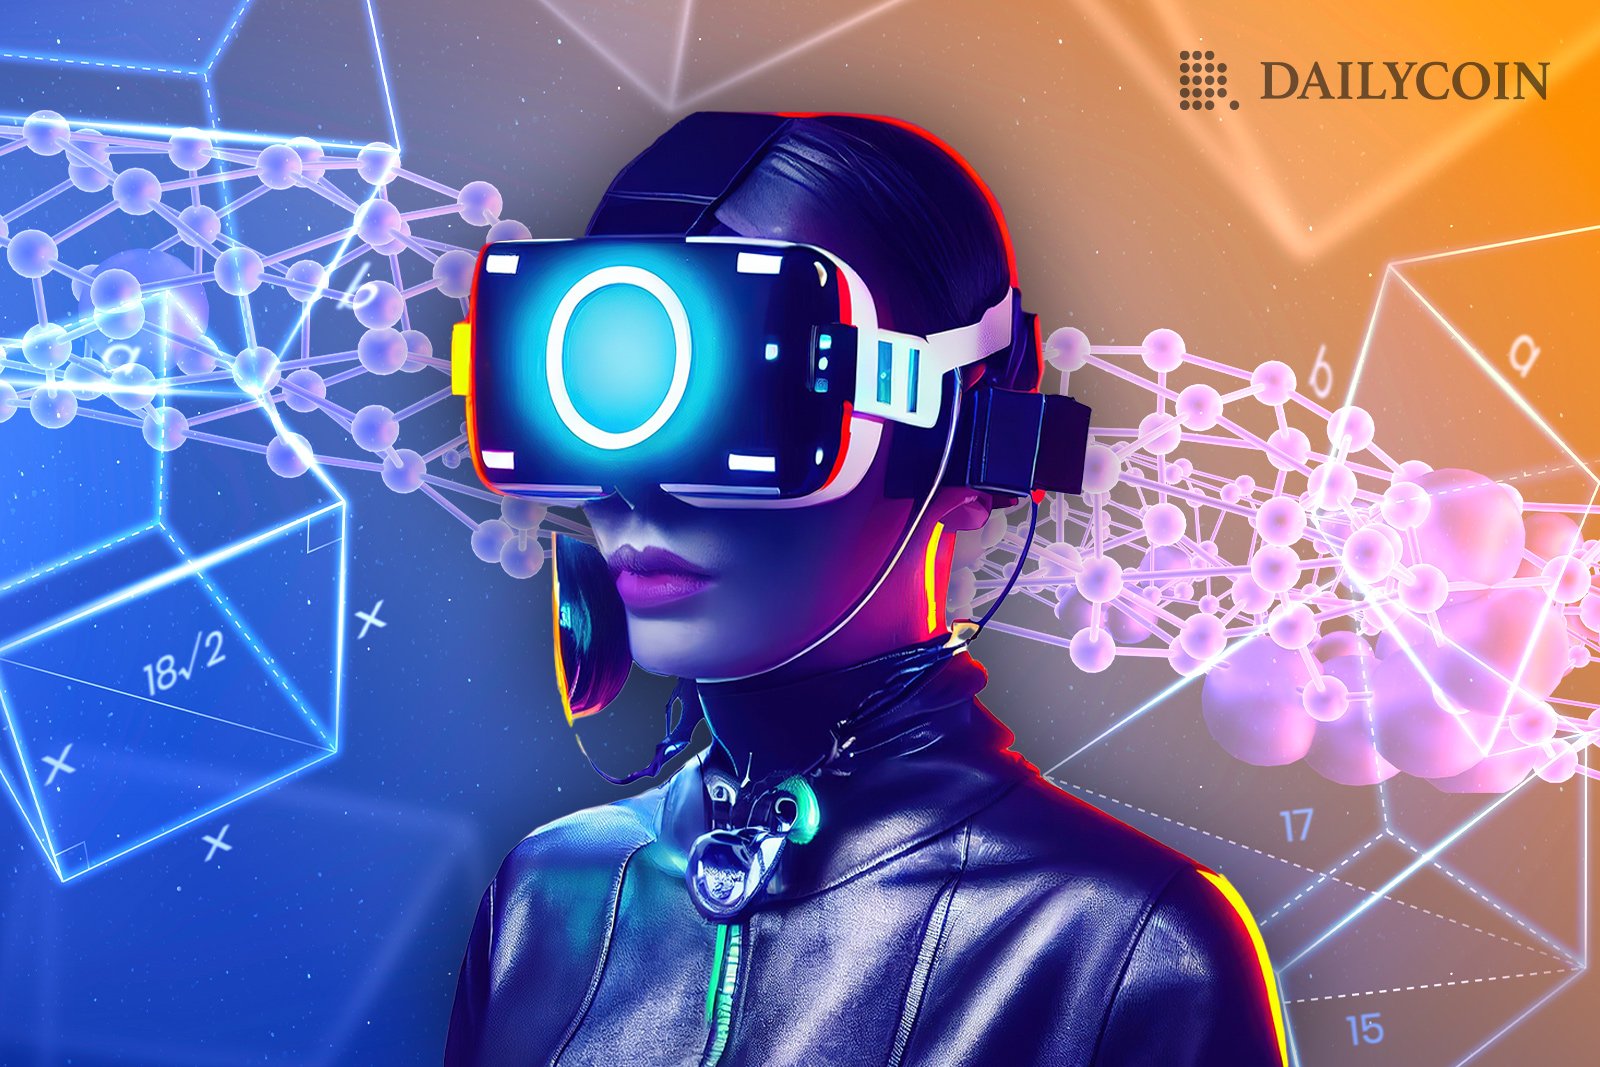 A woman wearing futuristic VR headset on a background symbolizing blockchain.